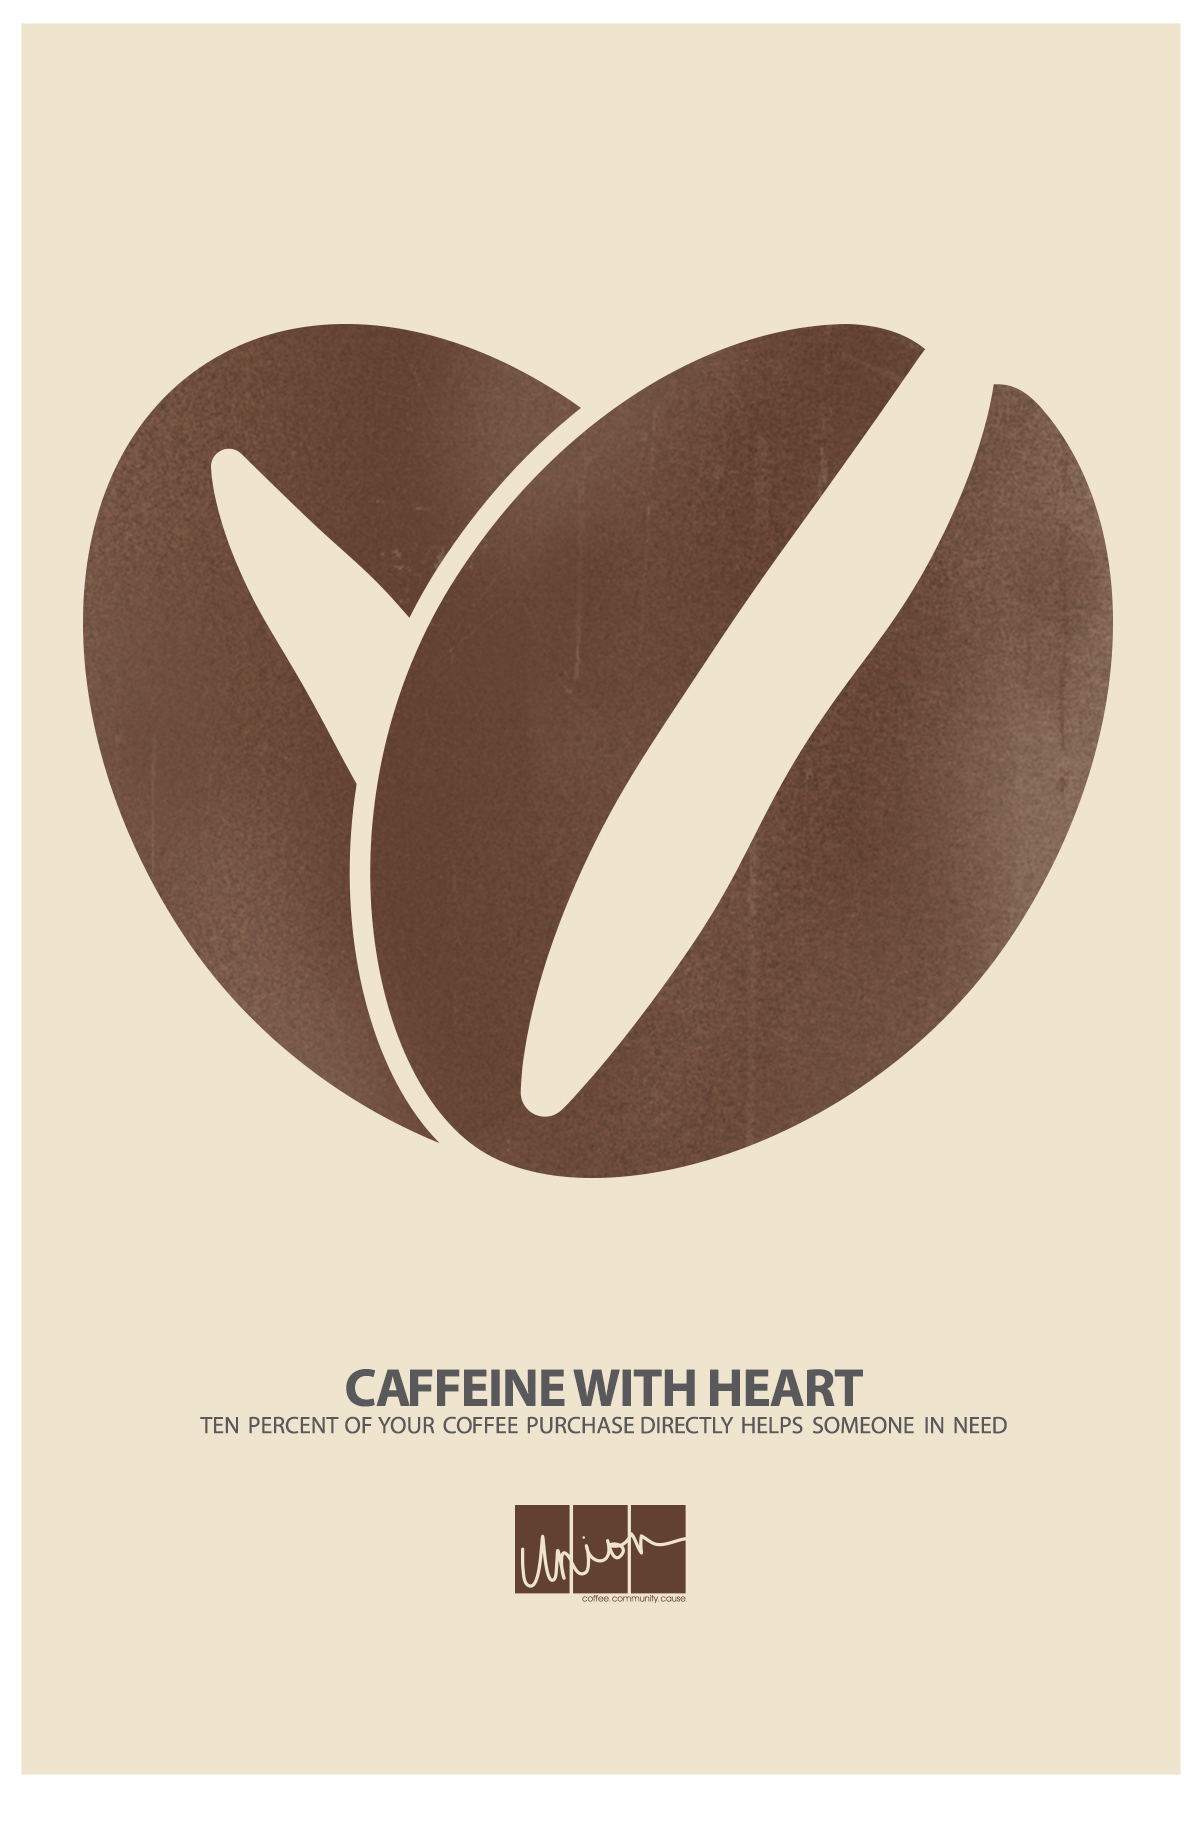 Union Coffee Poster for Child Literacy - Caffeine With Heart by Tidal Wave Marketing